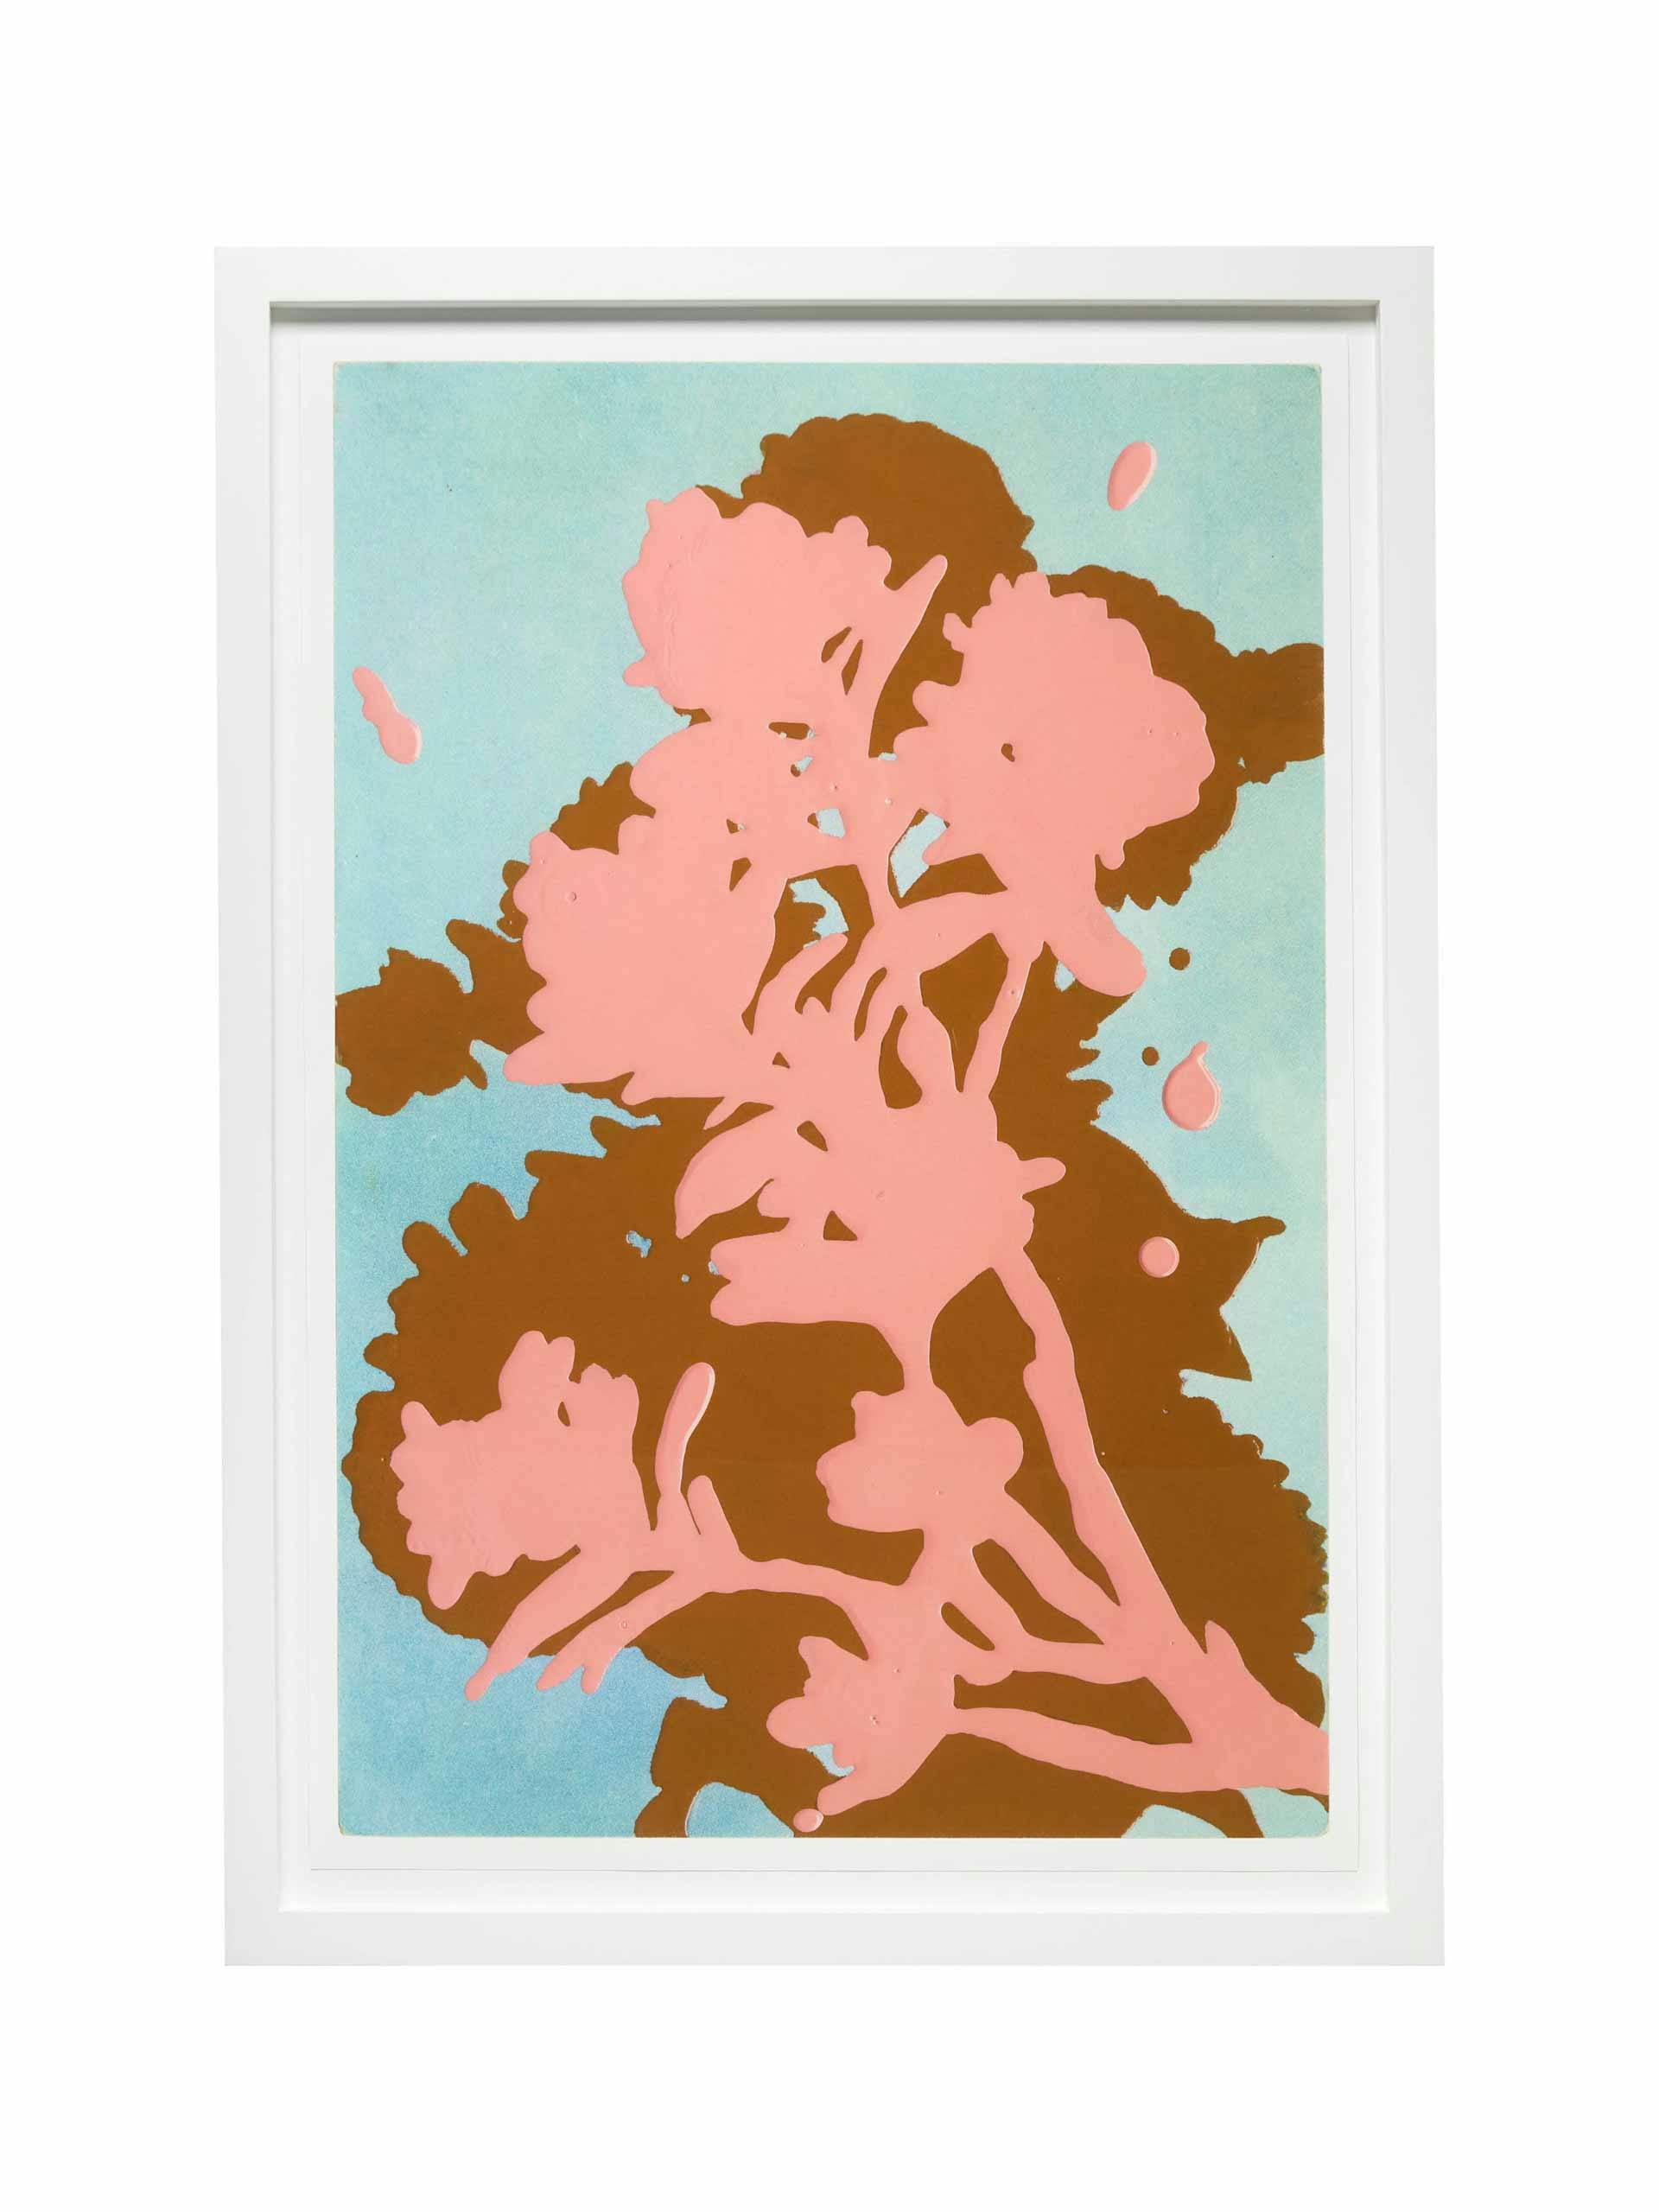 "Pink and Rust Flowers" by Kavel Rafferty